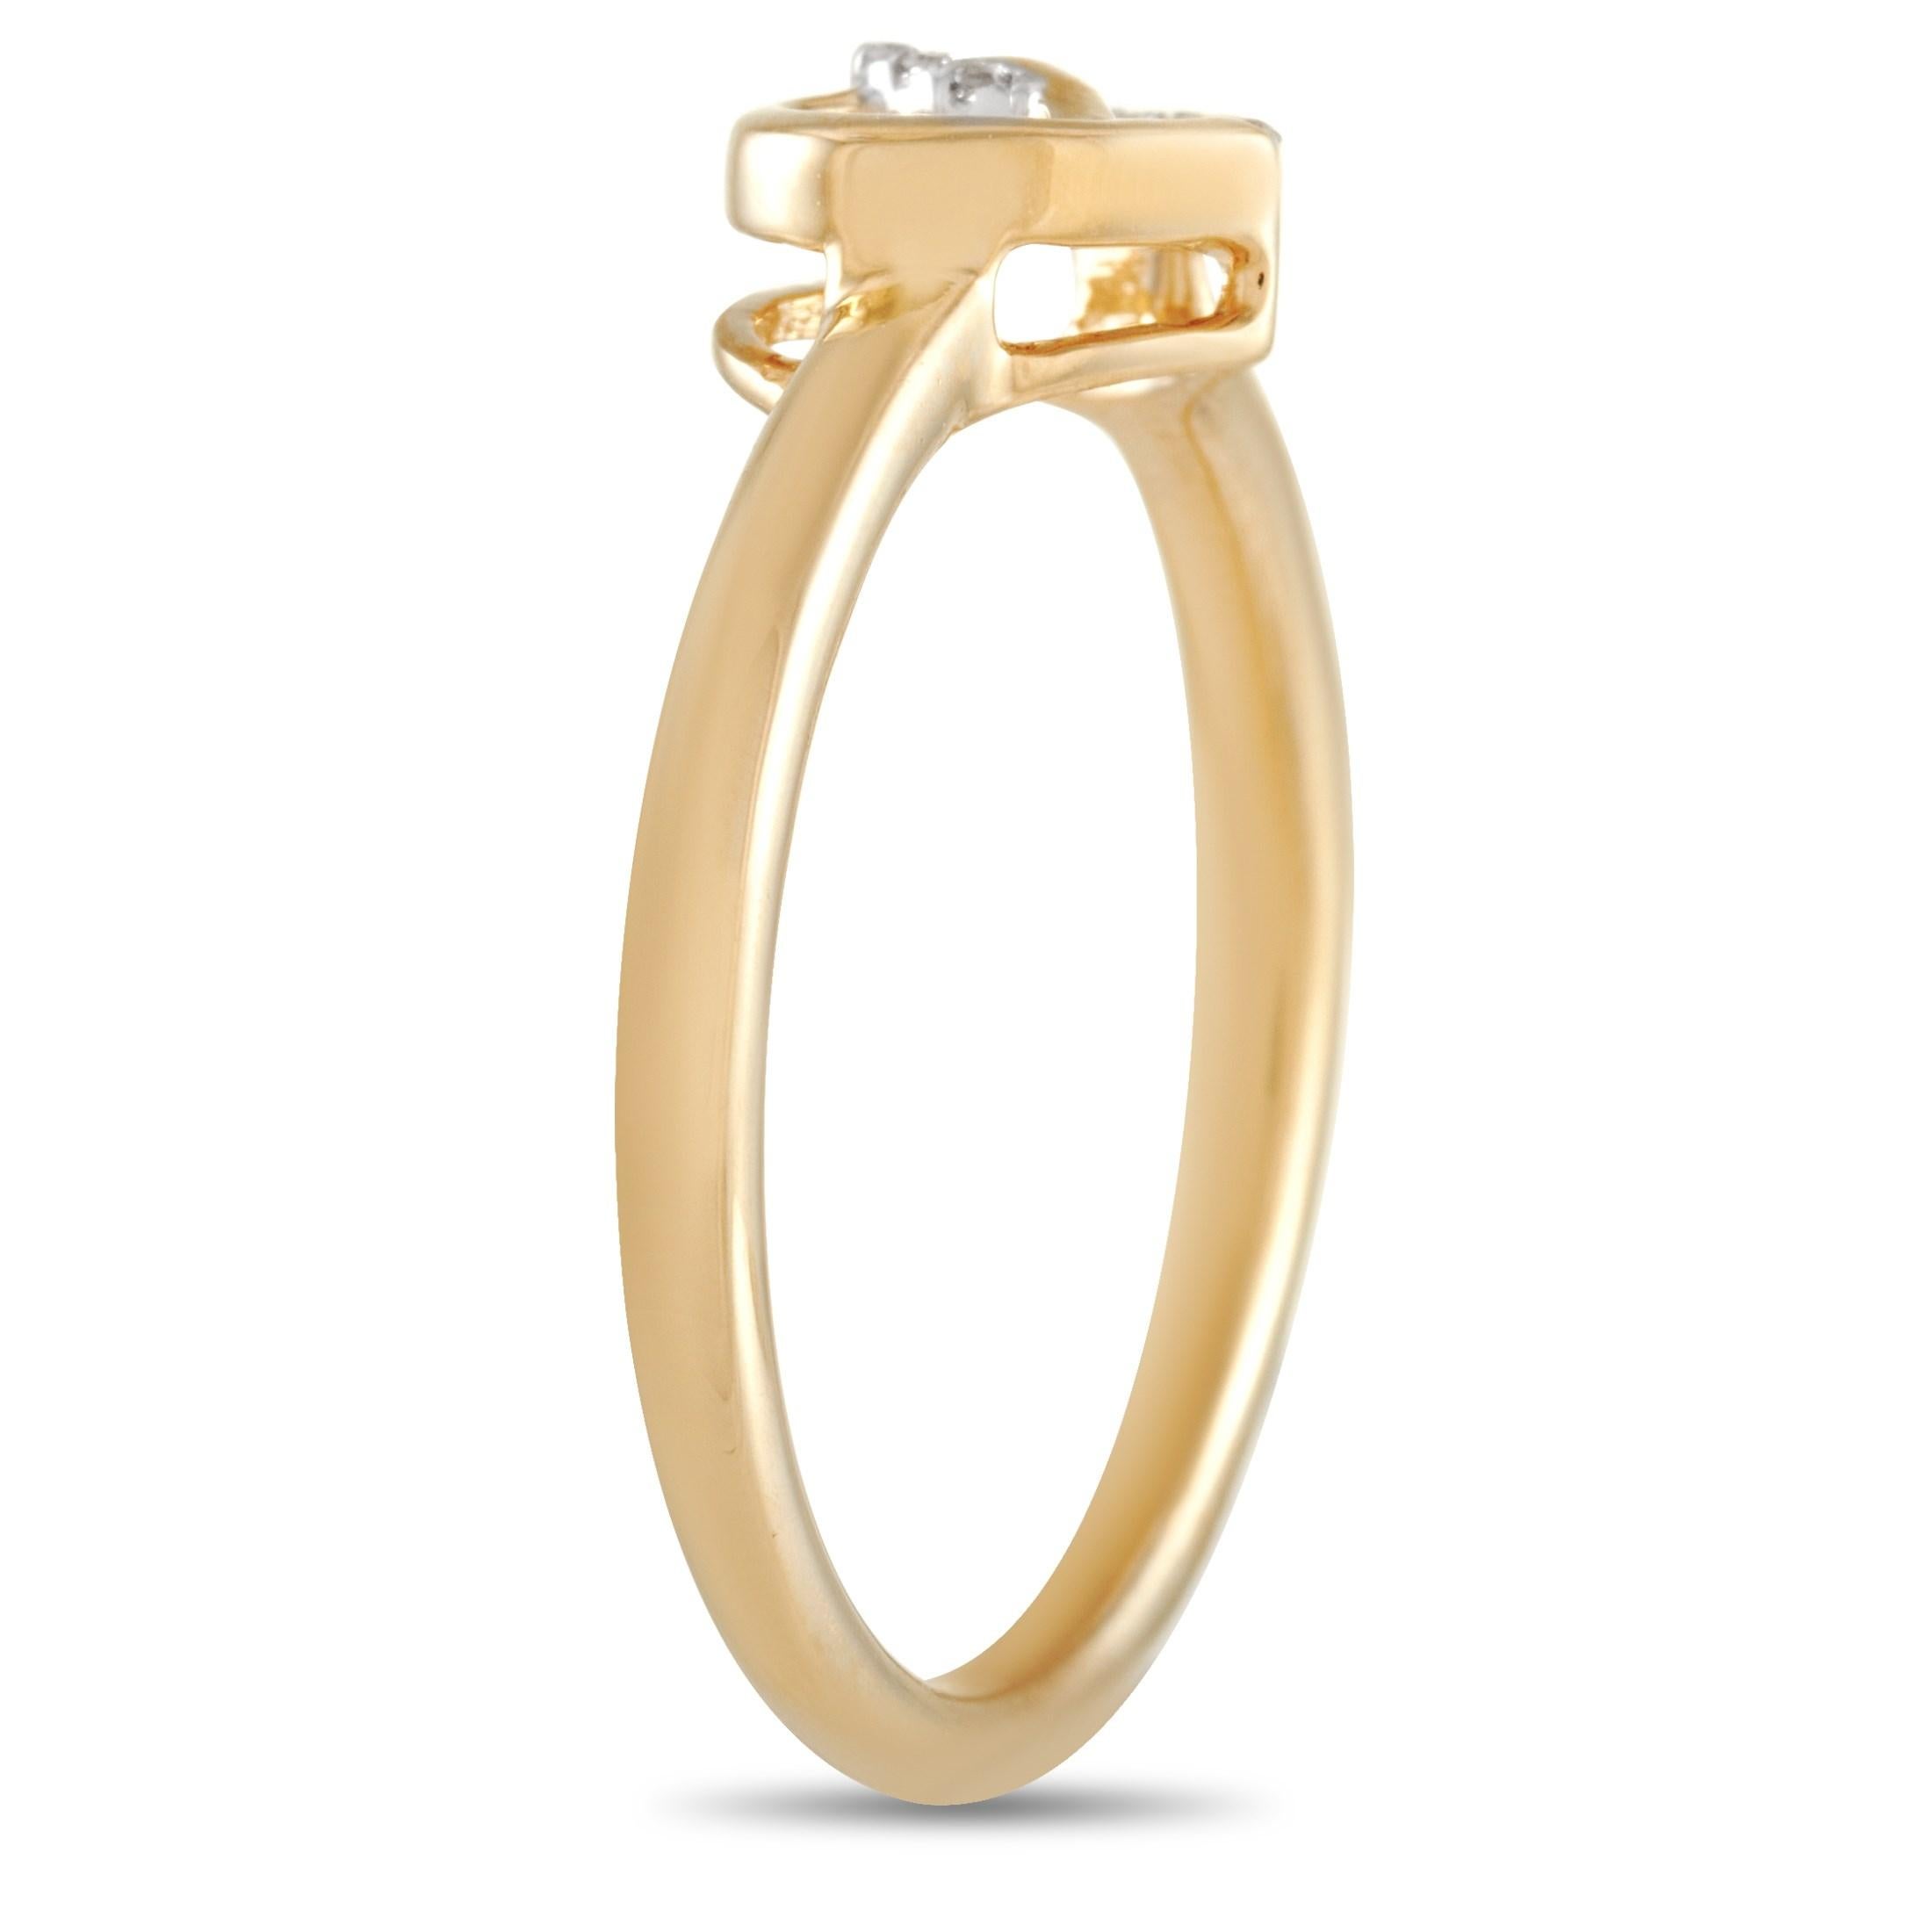 This LB Exclusive 14K Yellow Gold 0.05 ct Diamond Intertwined Heart Ring is made with 14K yellow gold and features a heart shape set with 0.05 carats of round-cut diamonds around half of the heart. The ring has a band thickness of 2 mm, a top height